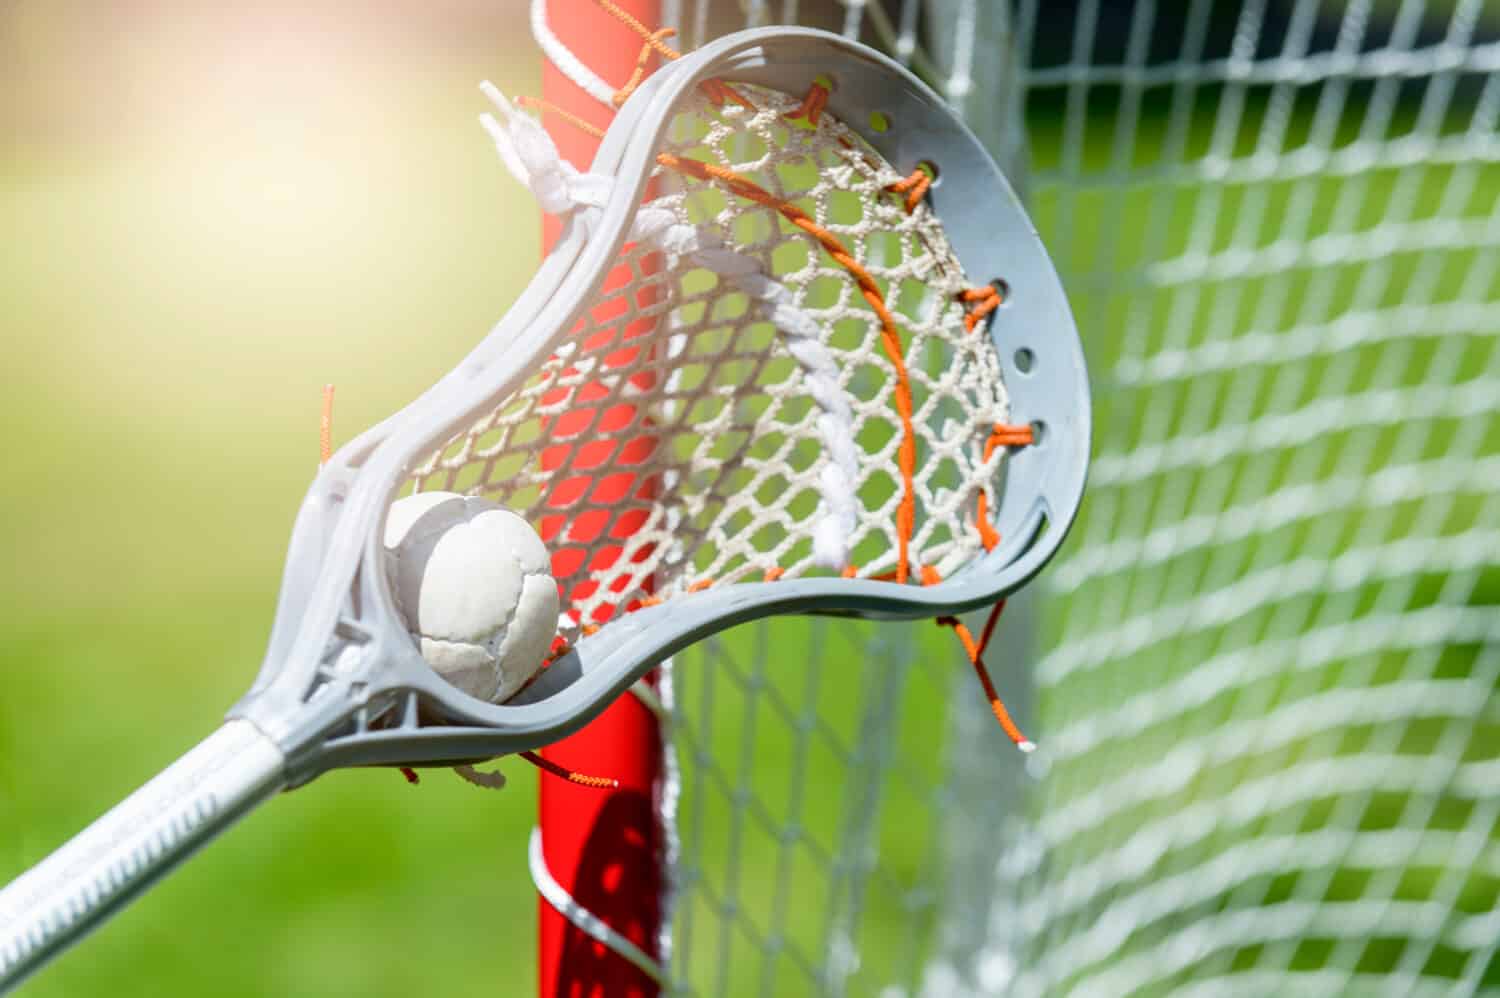 Abstract view of a lacrosse stick scooping up a ball. Sunny day